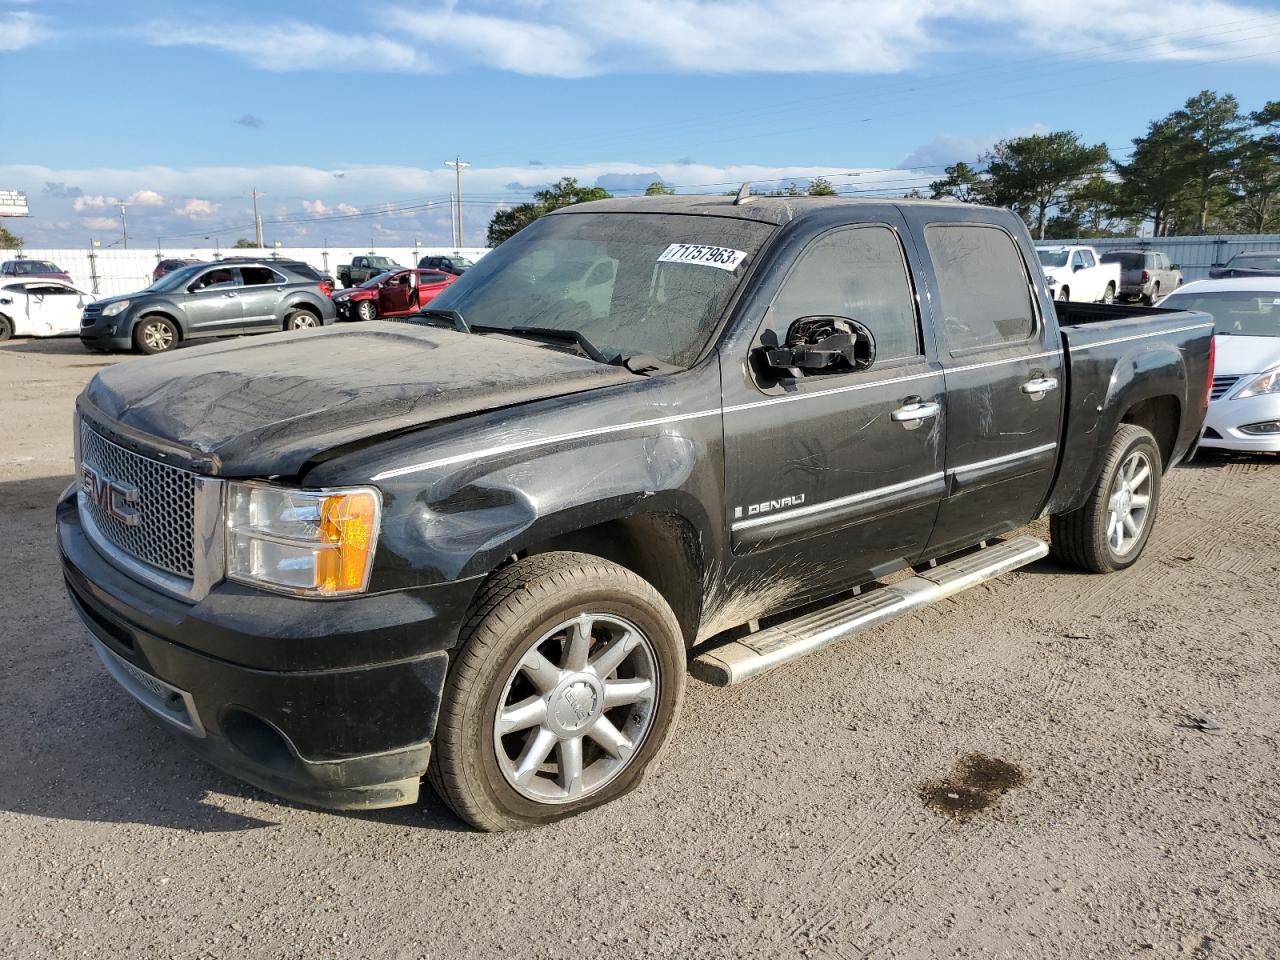 2GTEC638681****** Salvage and Wrecked 2008 GMC Sierra 1500 in AL - Newton